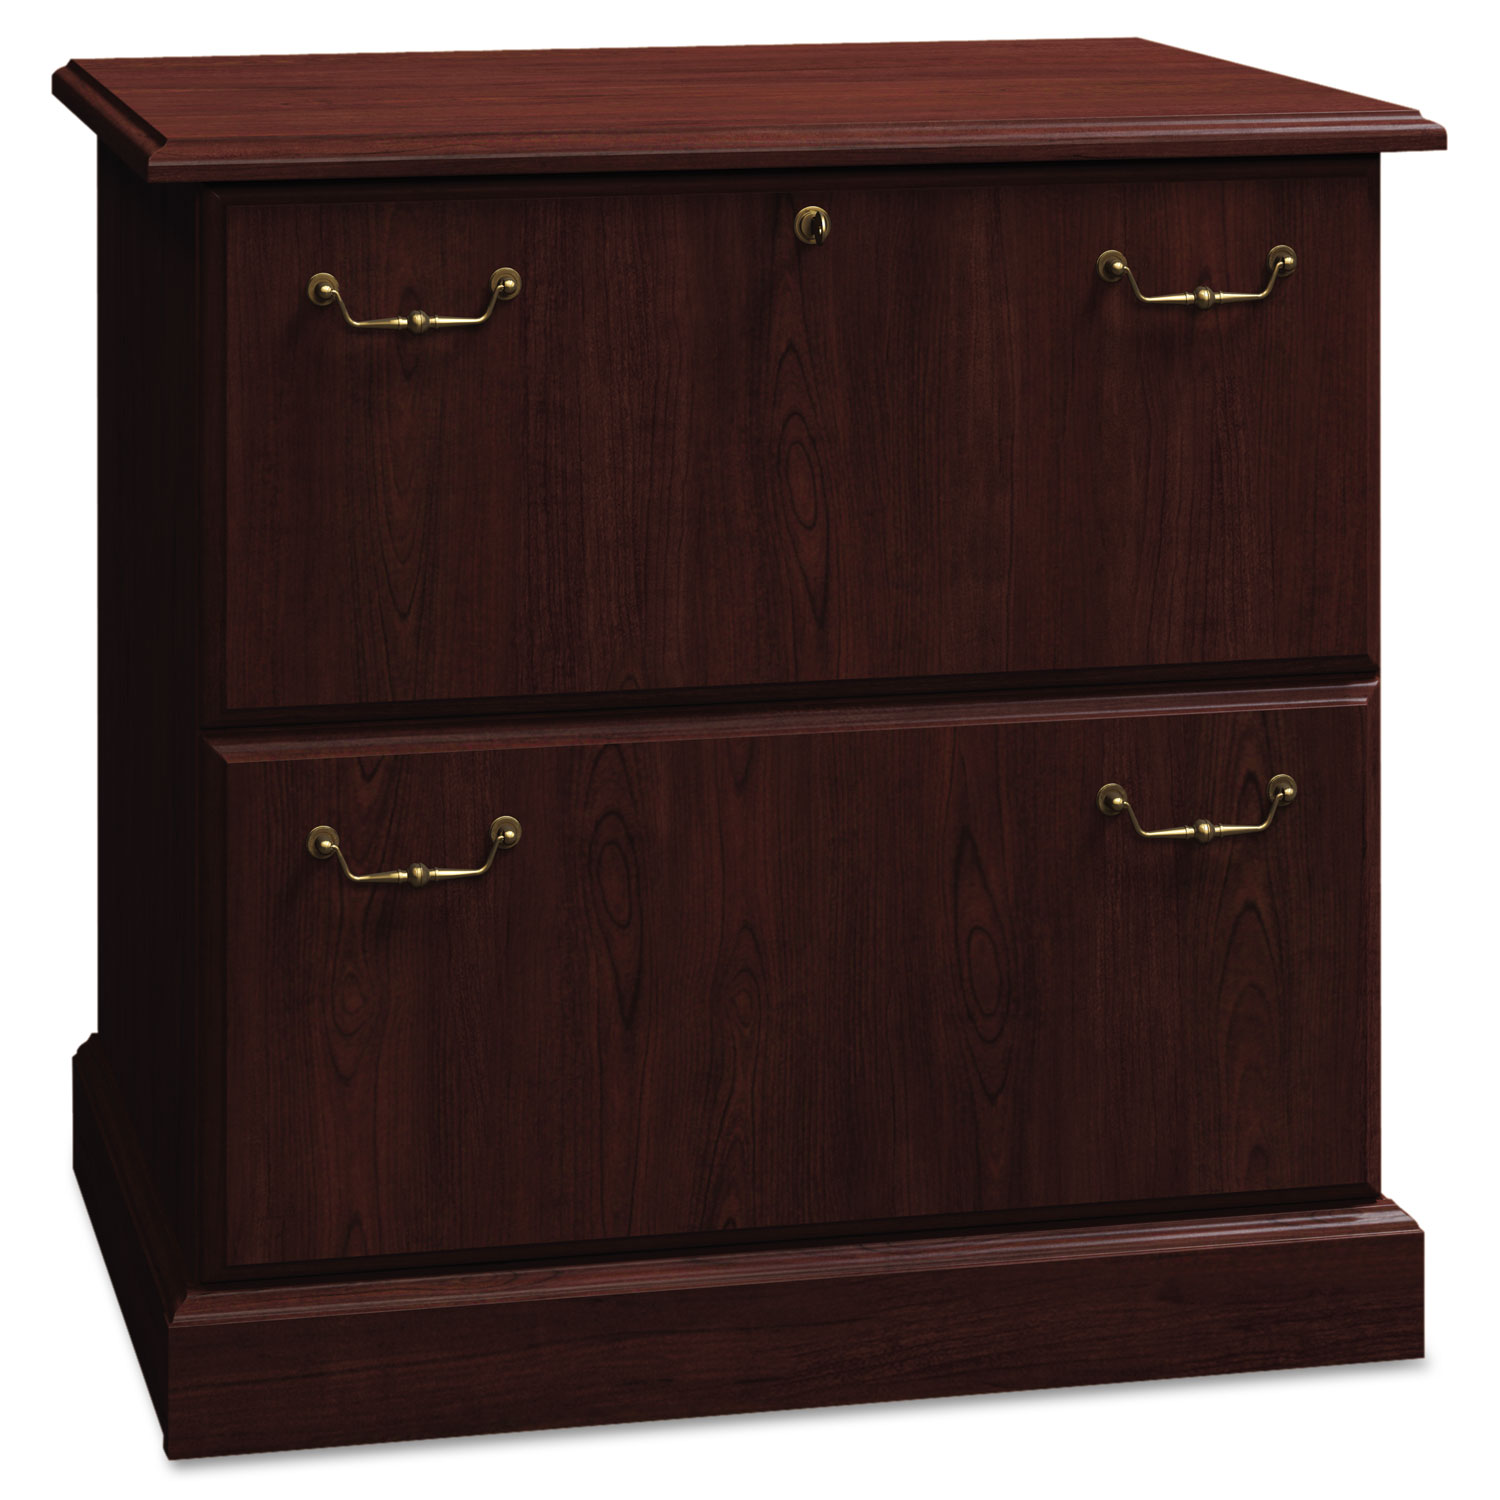  Bush 6354ACS-03 Syndicate Collection Two-Drawer Lateral File, 31.88w x 23.25d x 20.75h, Harvest Cherry (BSH6354CS03) 